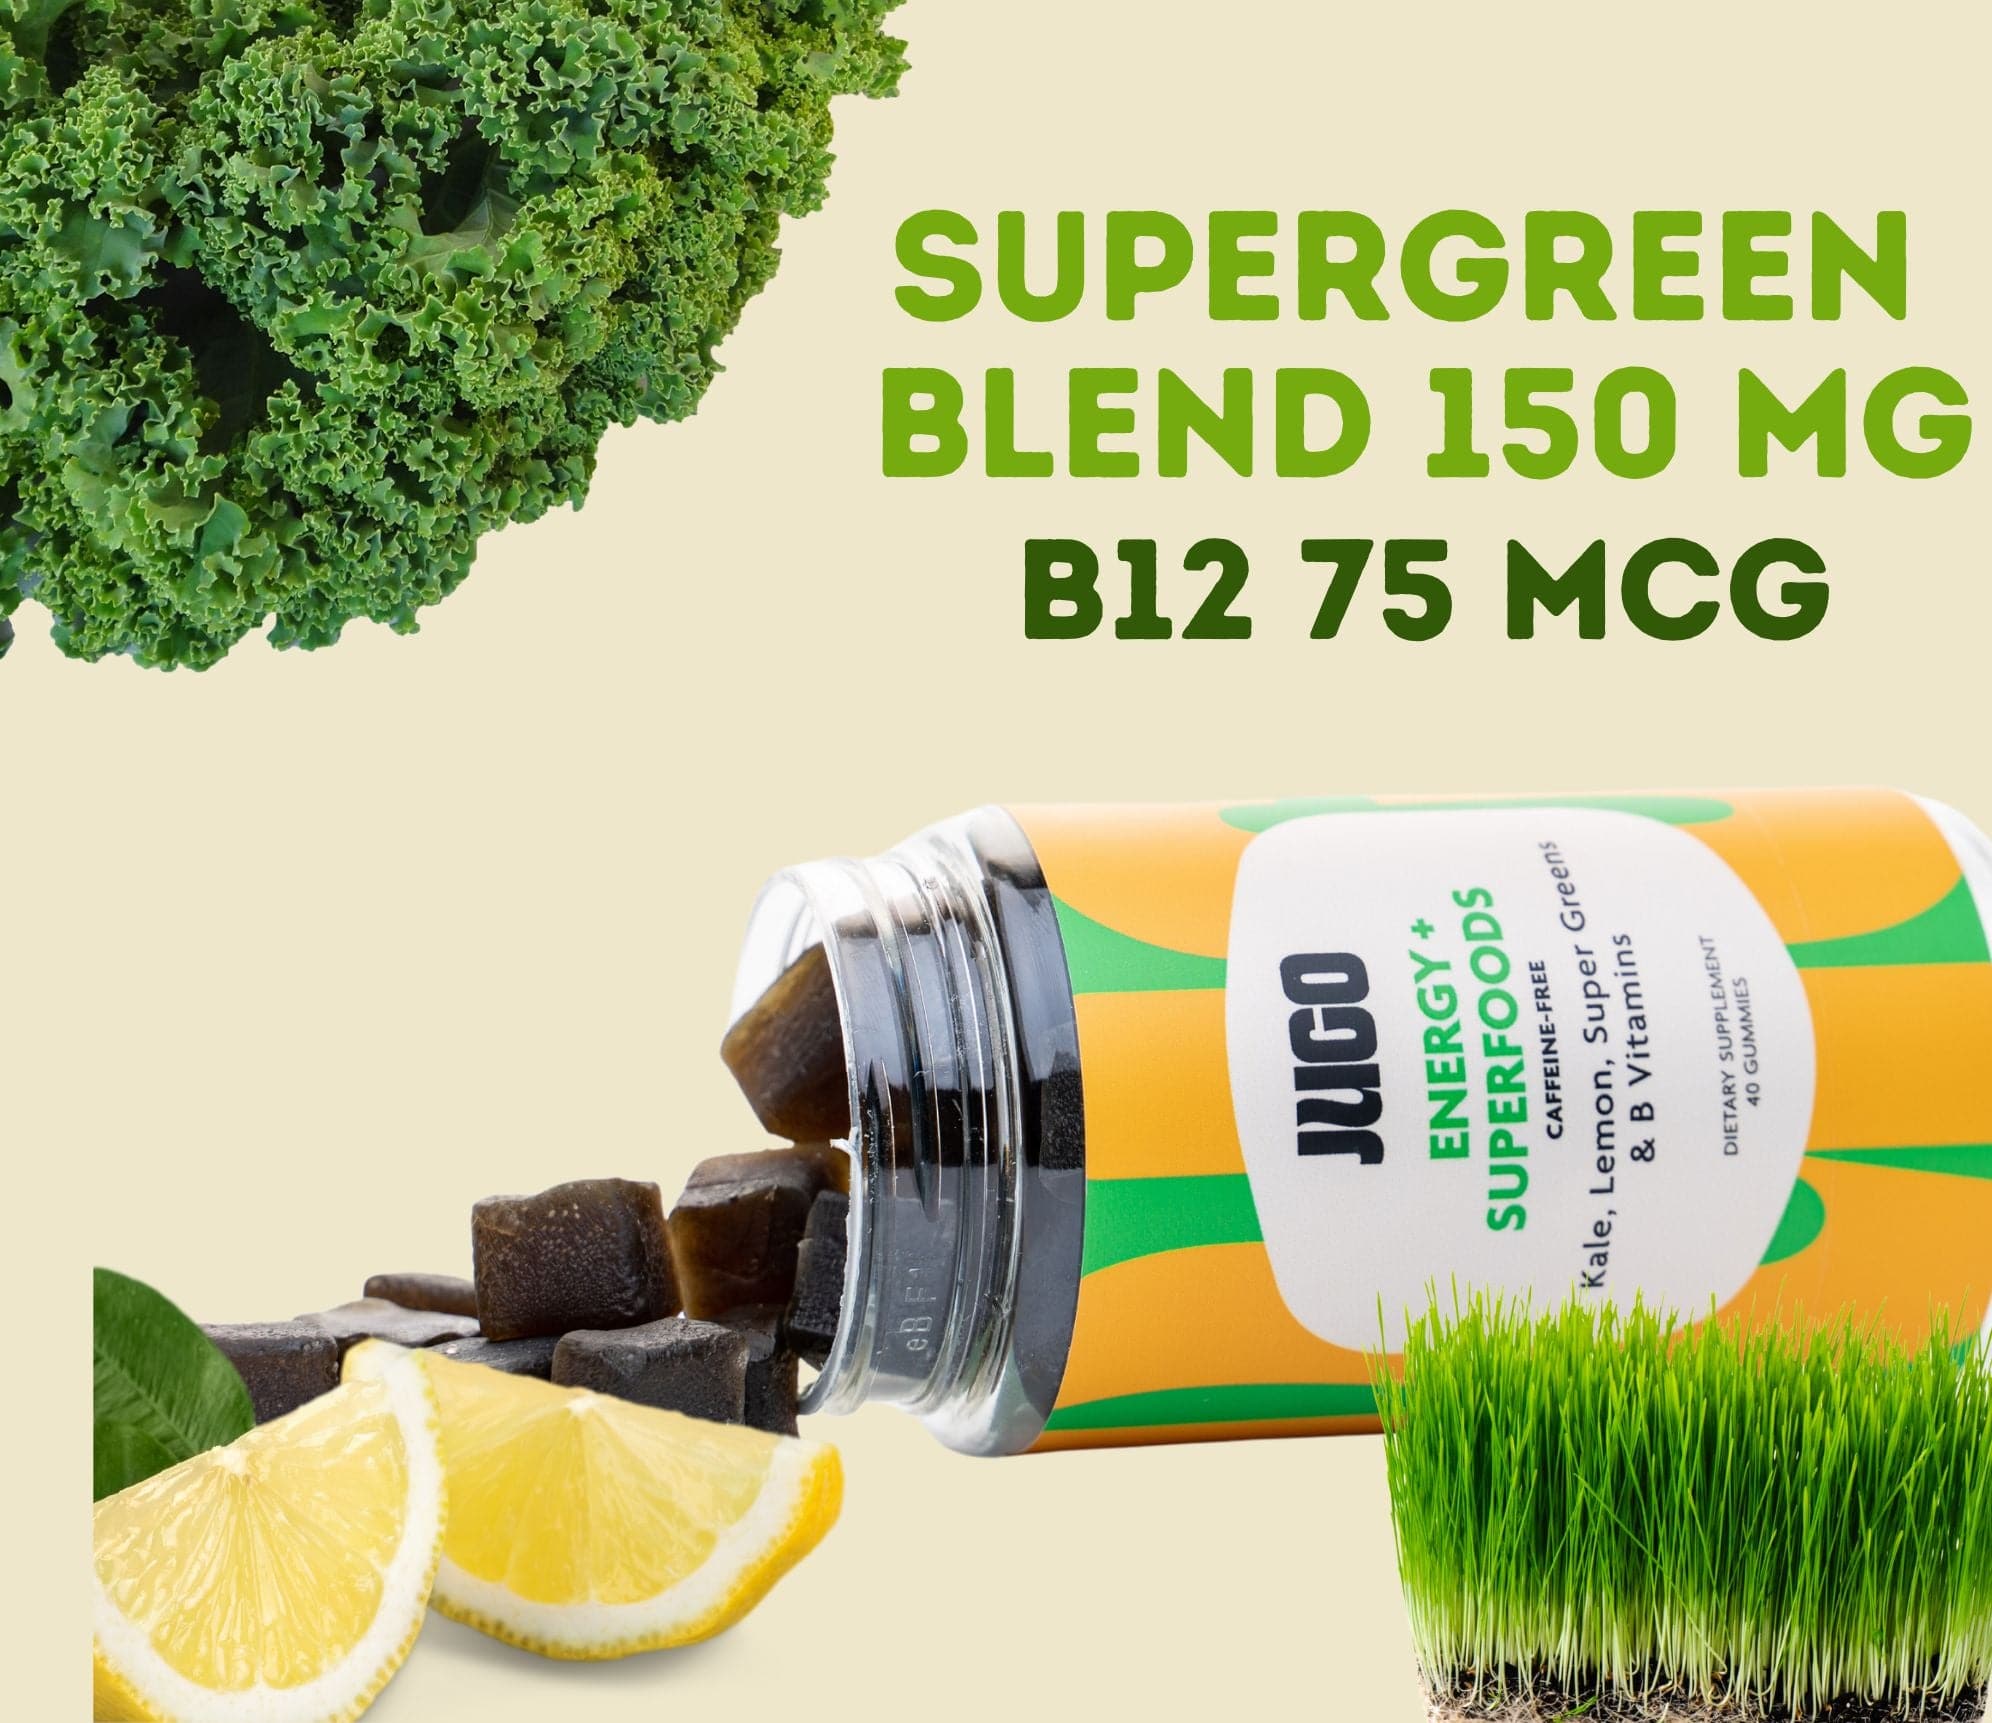 Natural energy supplements made with supergreens